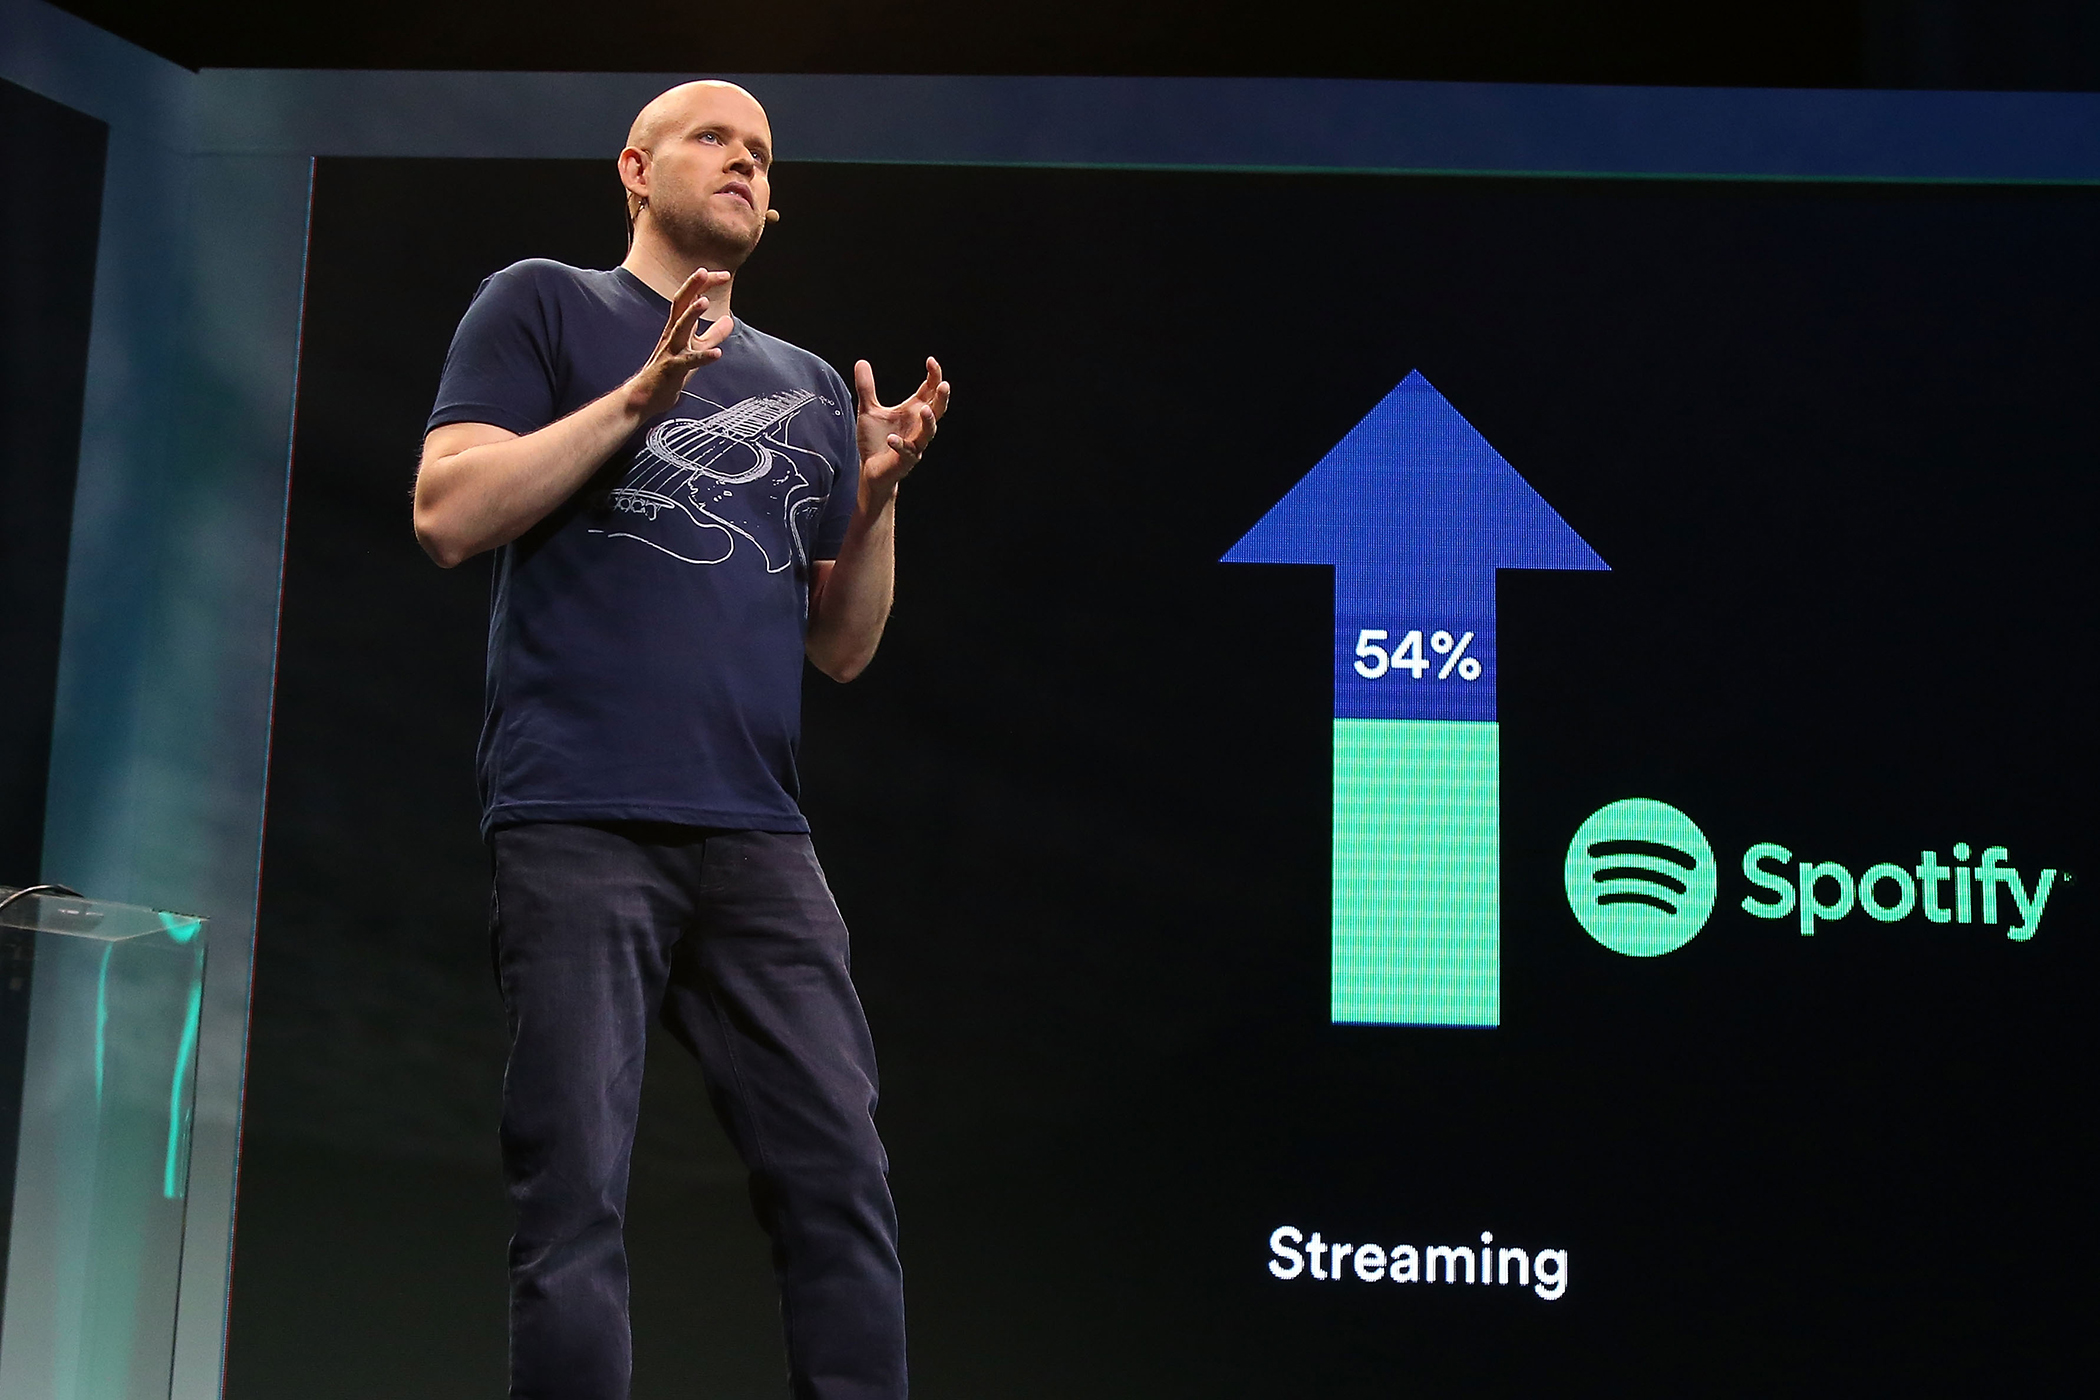 Spotify founder Daniel Ek speaks during the Spotify New Platform Launch at S.I.R. Studios on May 20, 2015 in New York City.